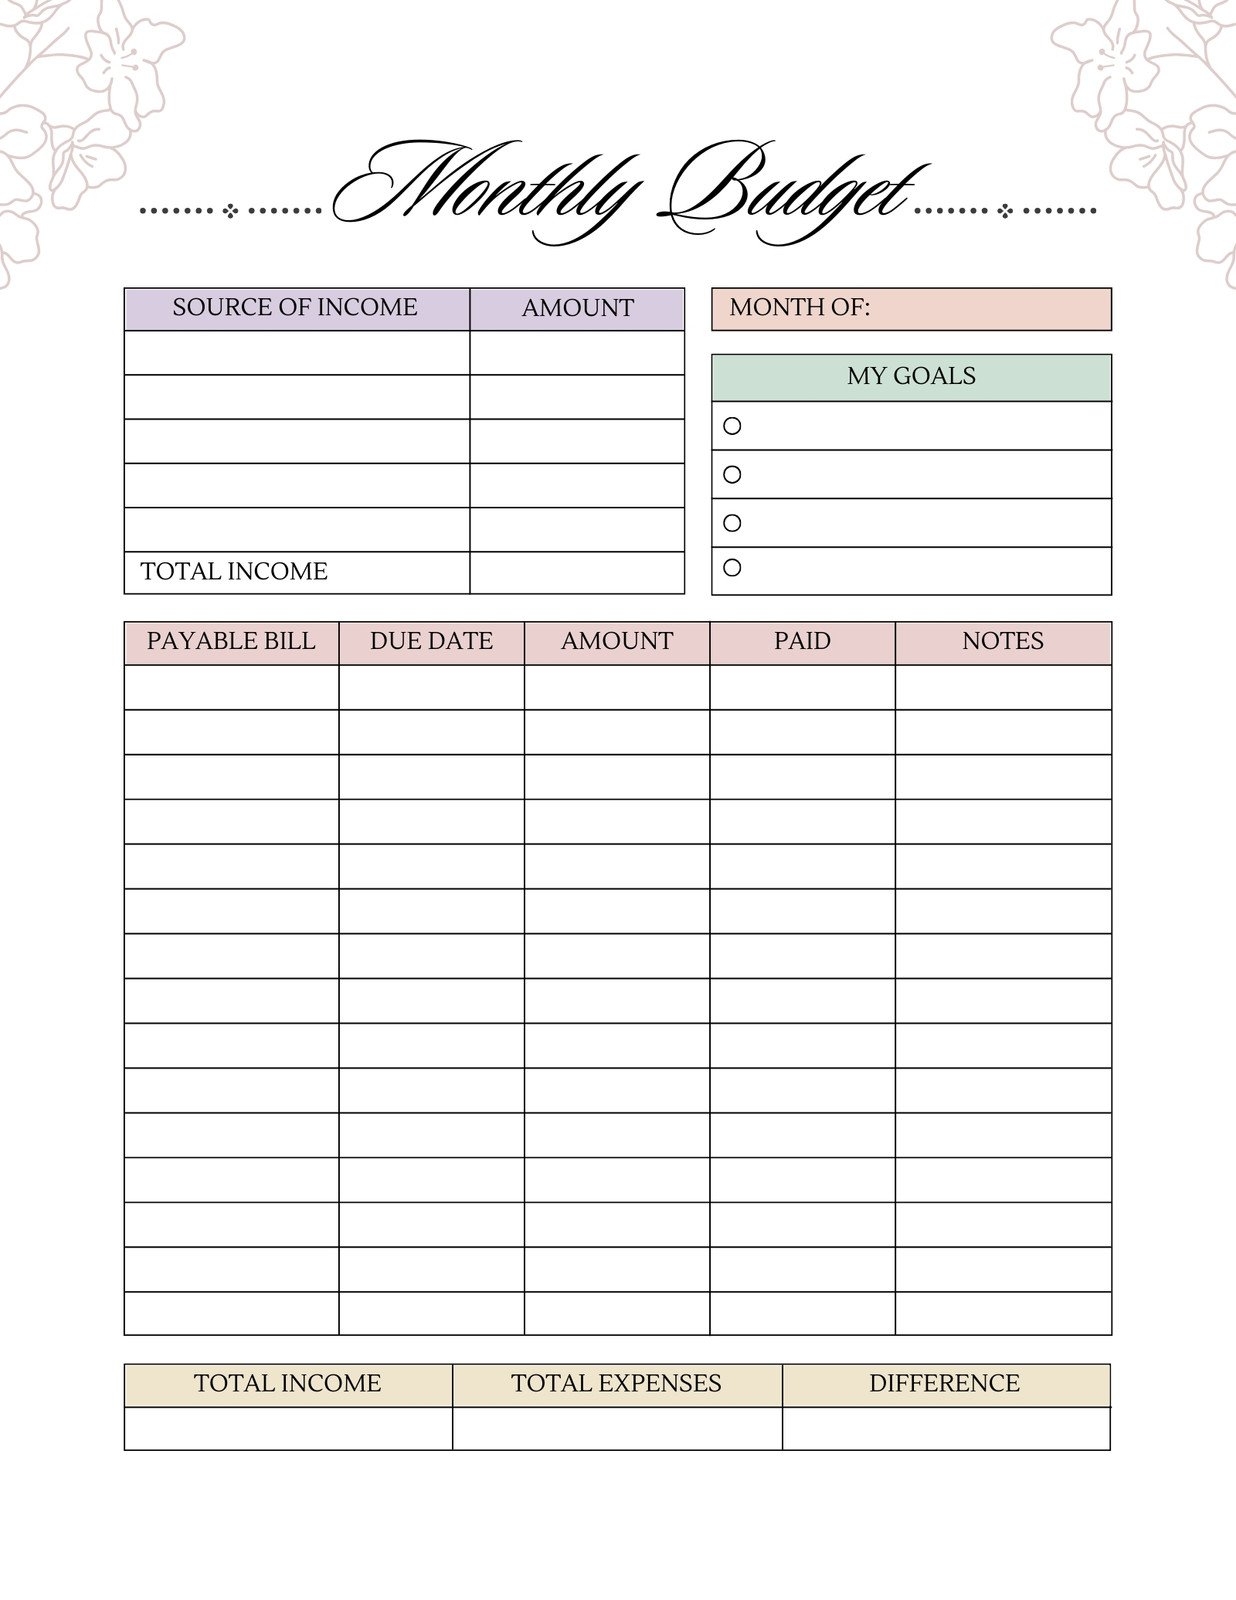 Free And Customizable Budget Templates - Free Printable Budget Forms